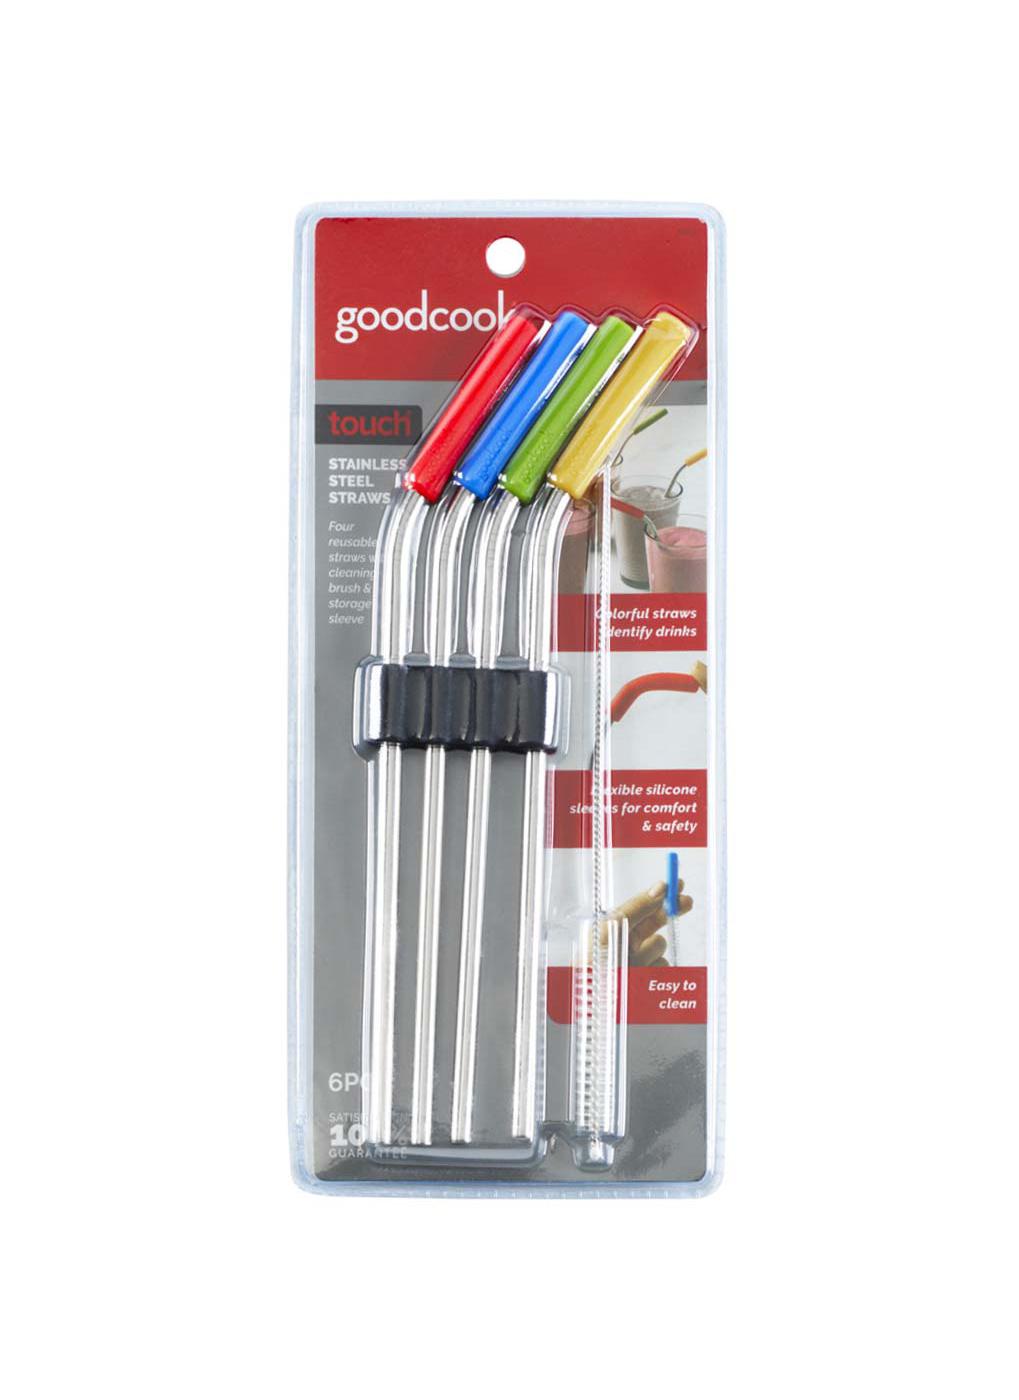 GoodCook Touch Stainless Steel Straw Set; image 1 of 5